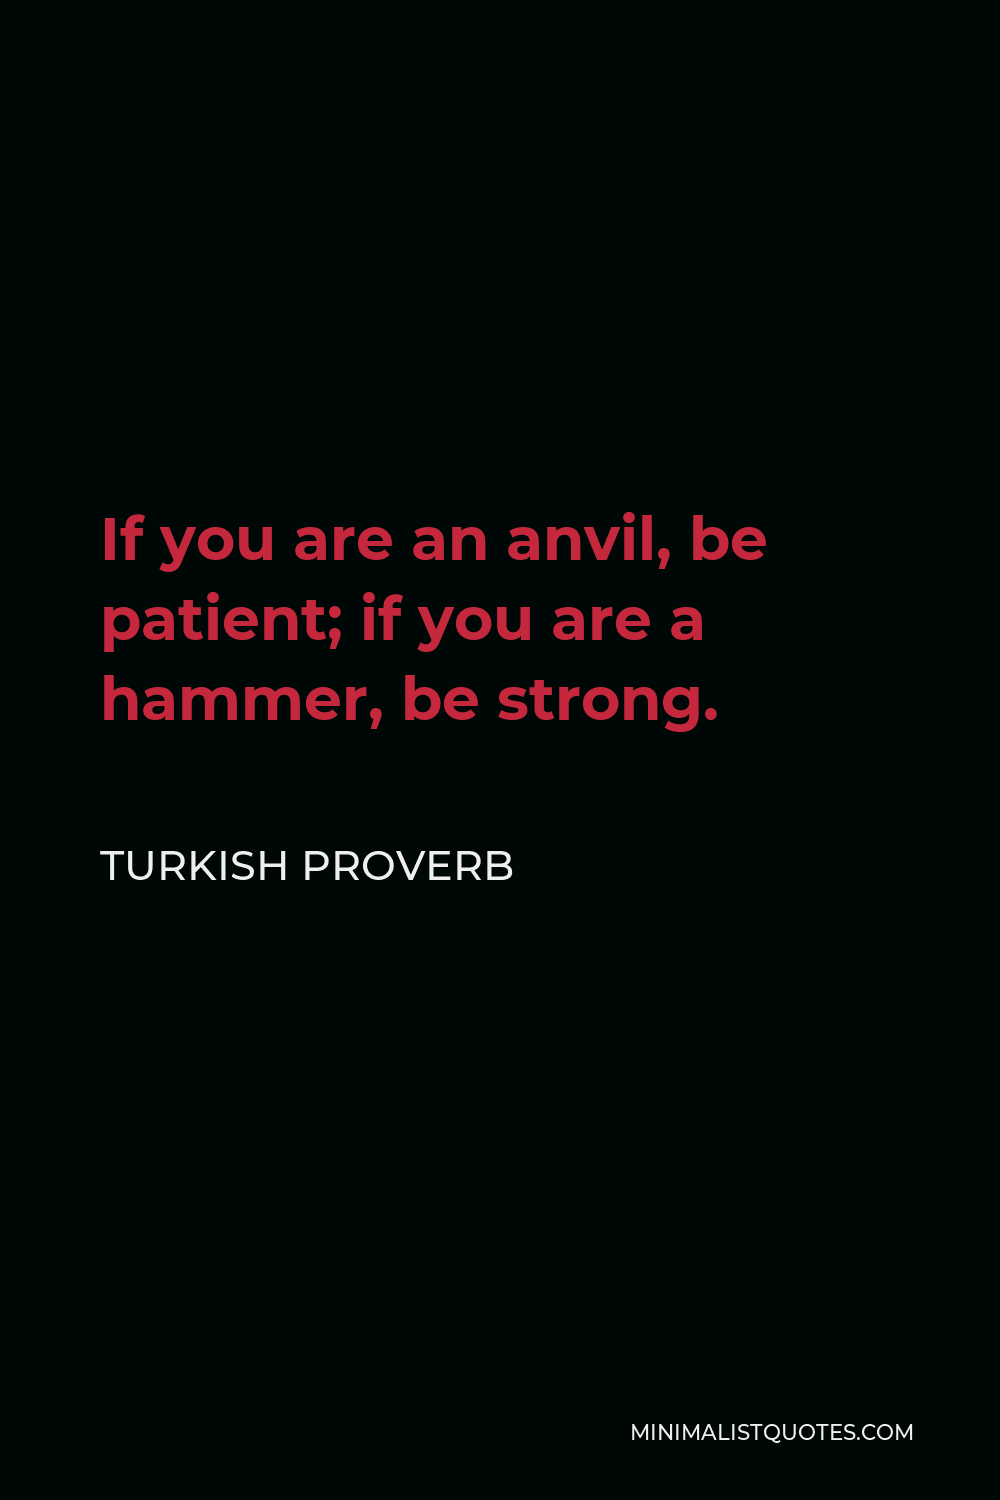 Turkish Proverb Quote - If you are an anvil, be patient; if you are a hammer, be strong.